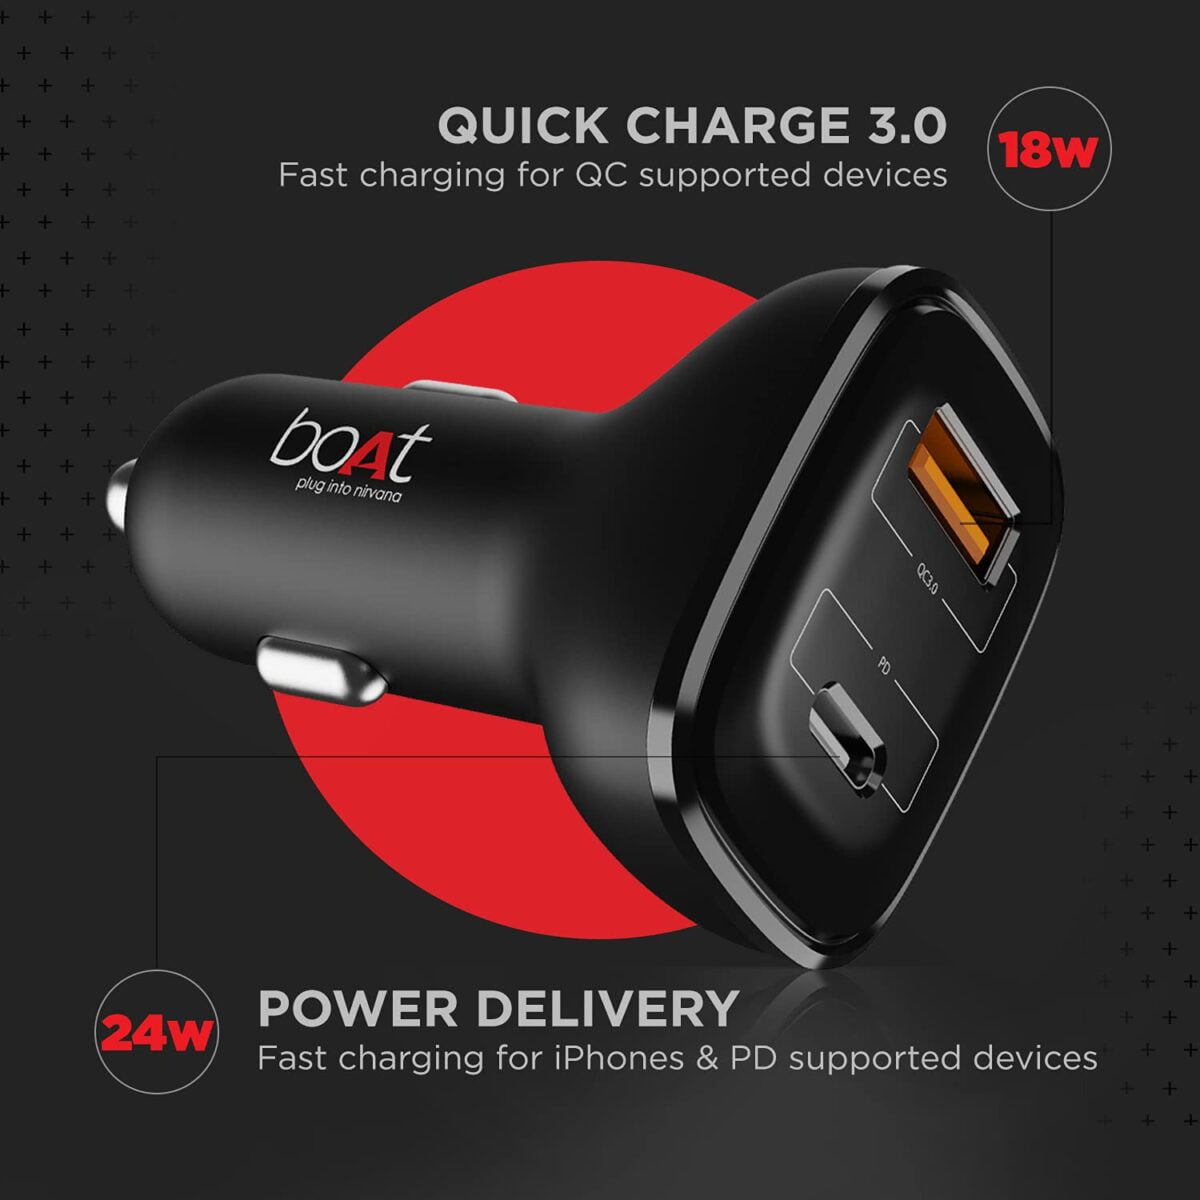 Boat dual port qc pd 24w fast car charger 5 boat dual port qc-pd 24w fast car charger